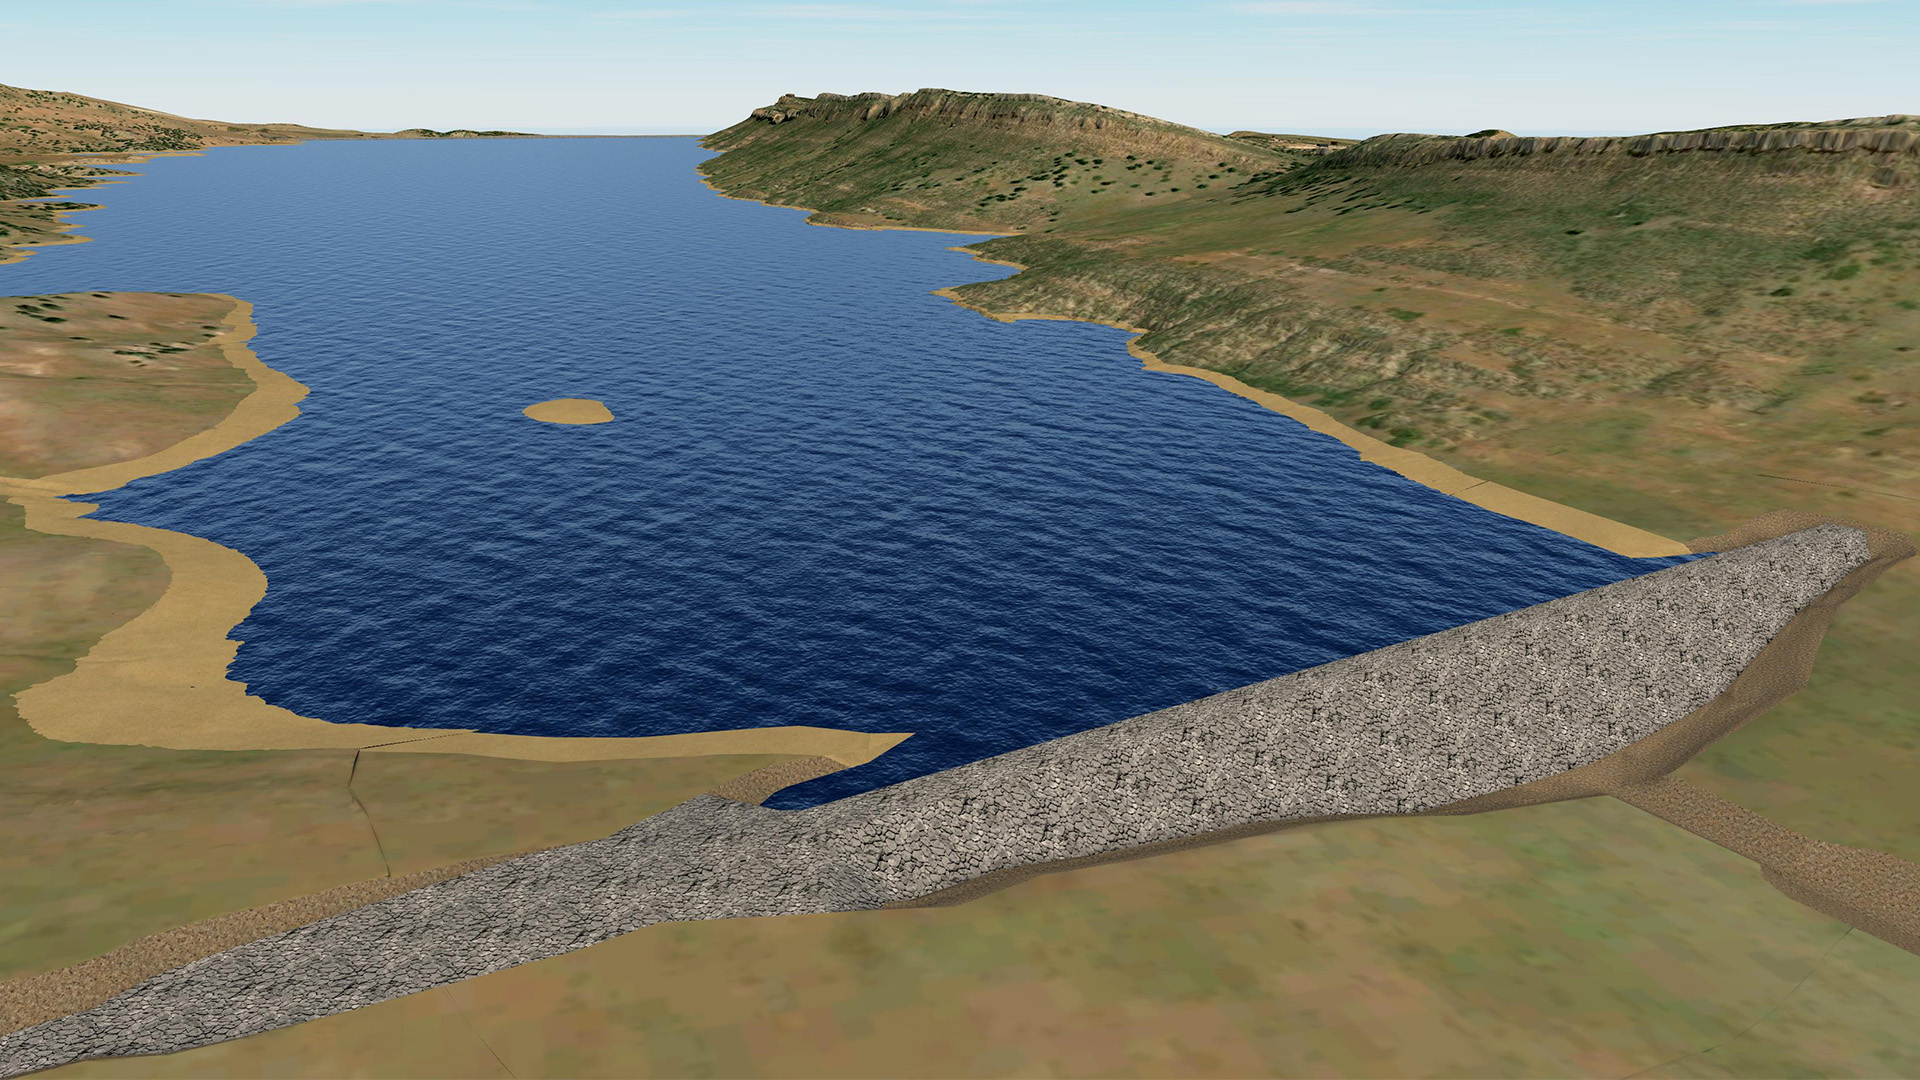 Rendering of the saddle dam at the southern end of the reservoir.